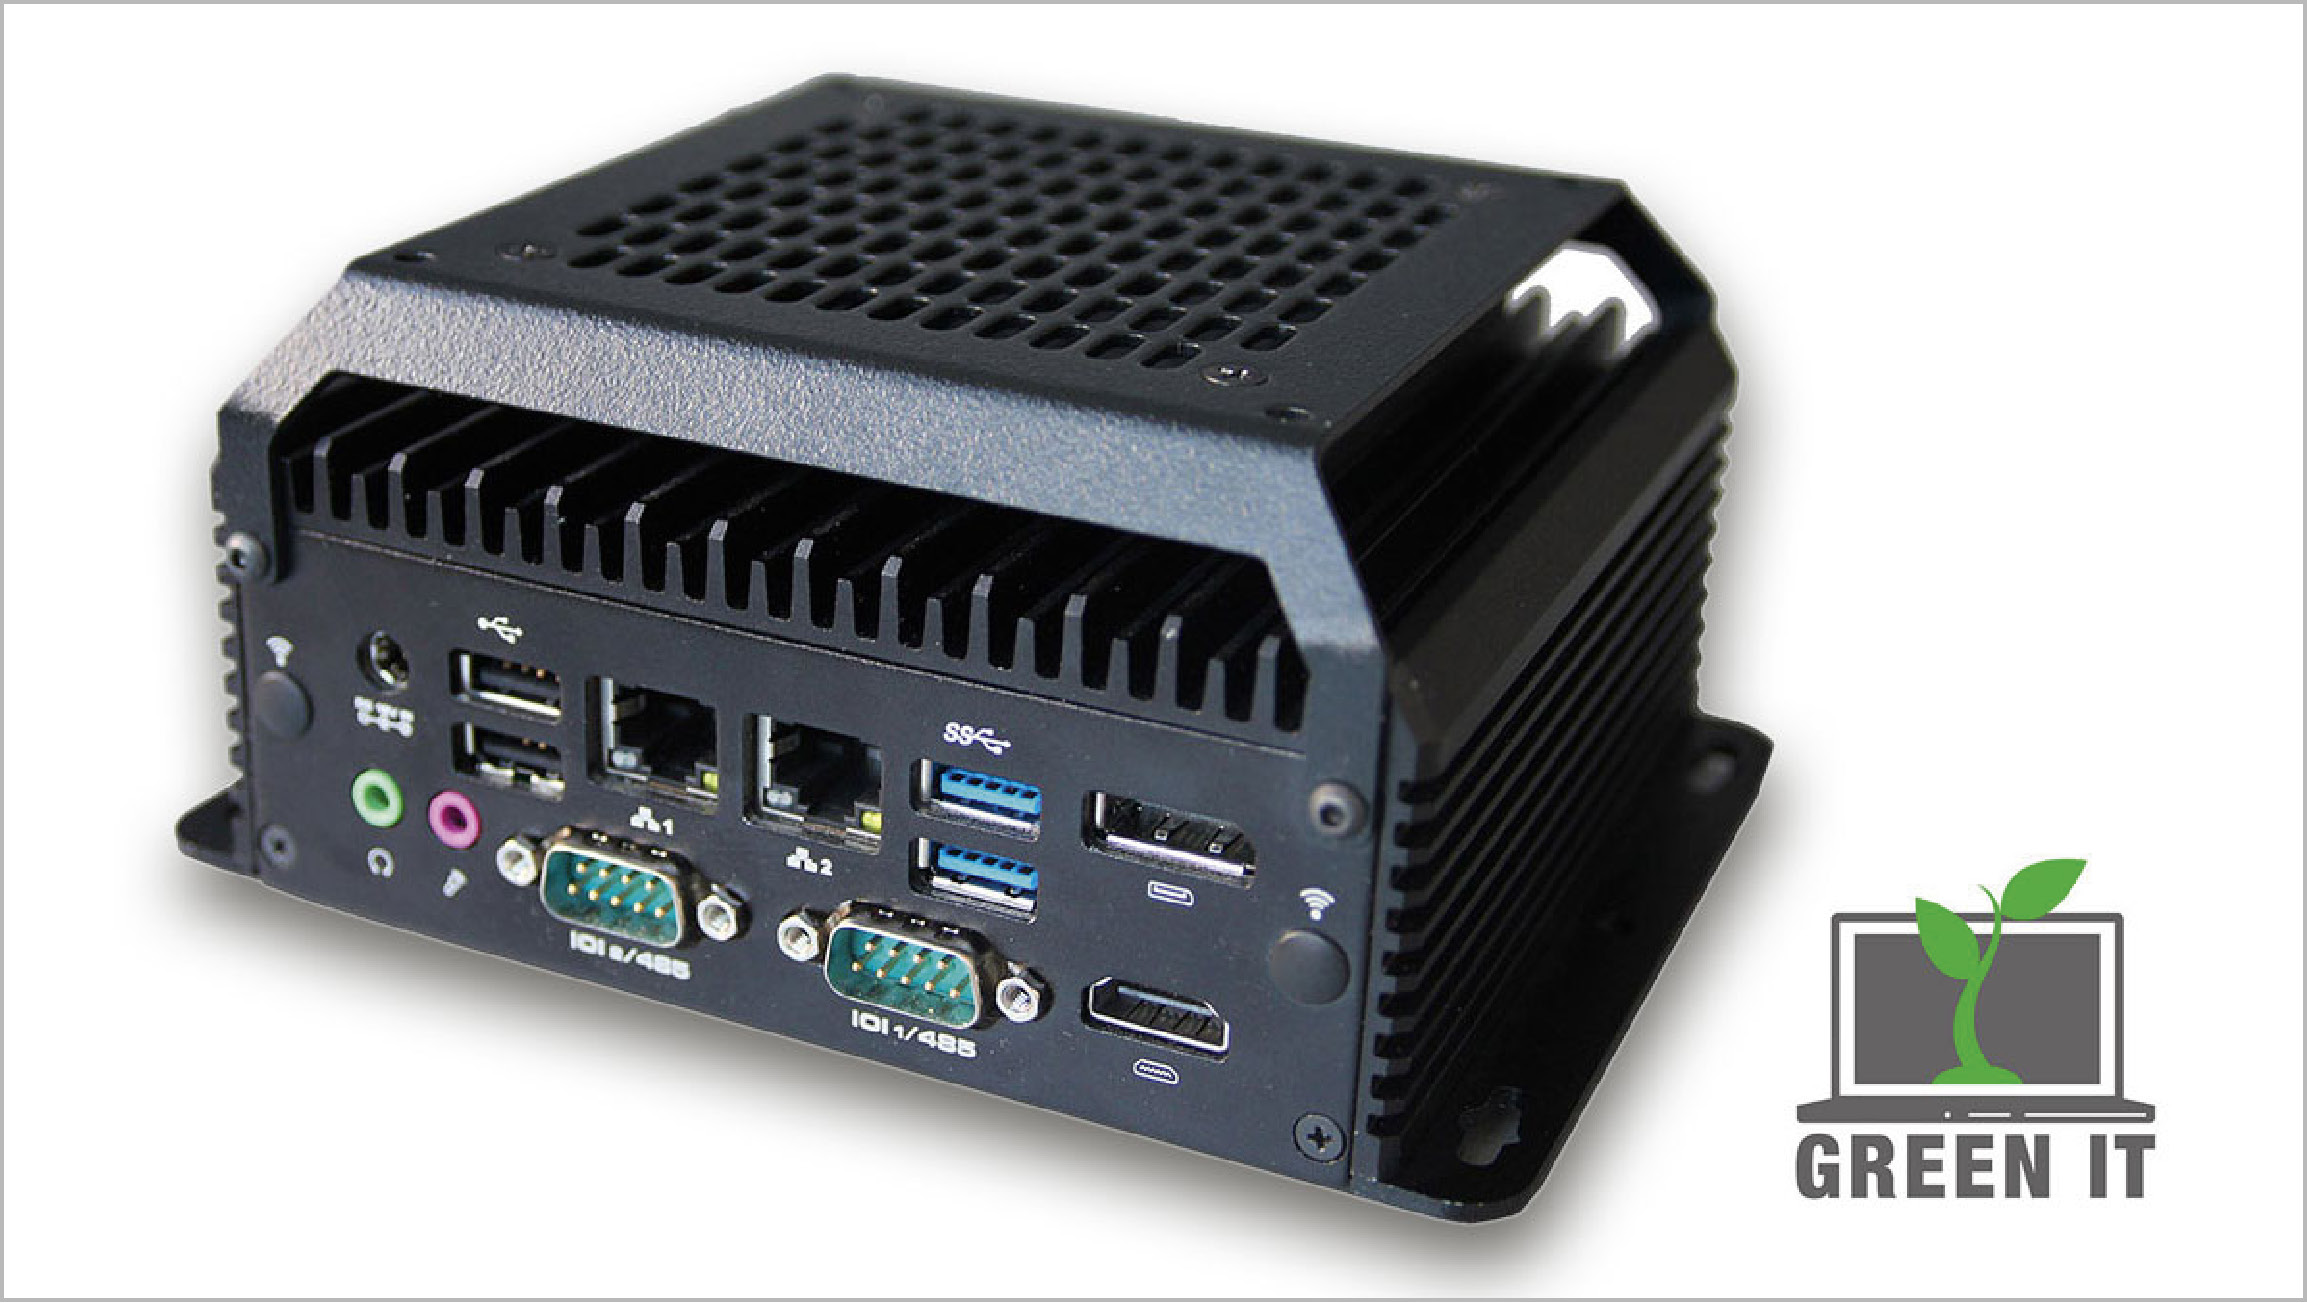 Powerful and economical Green IT embedded system